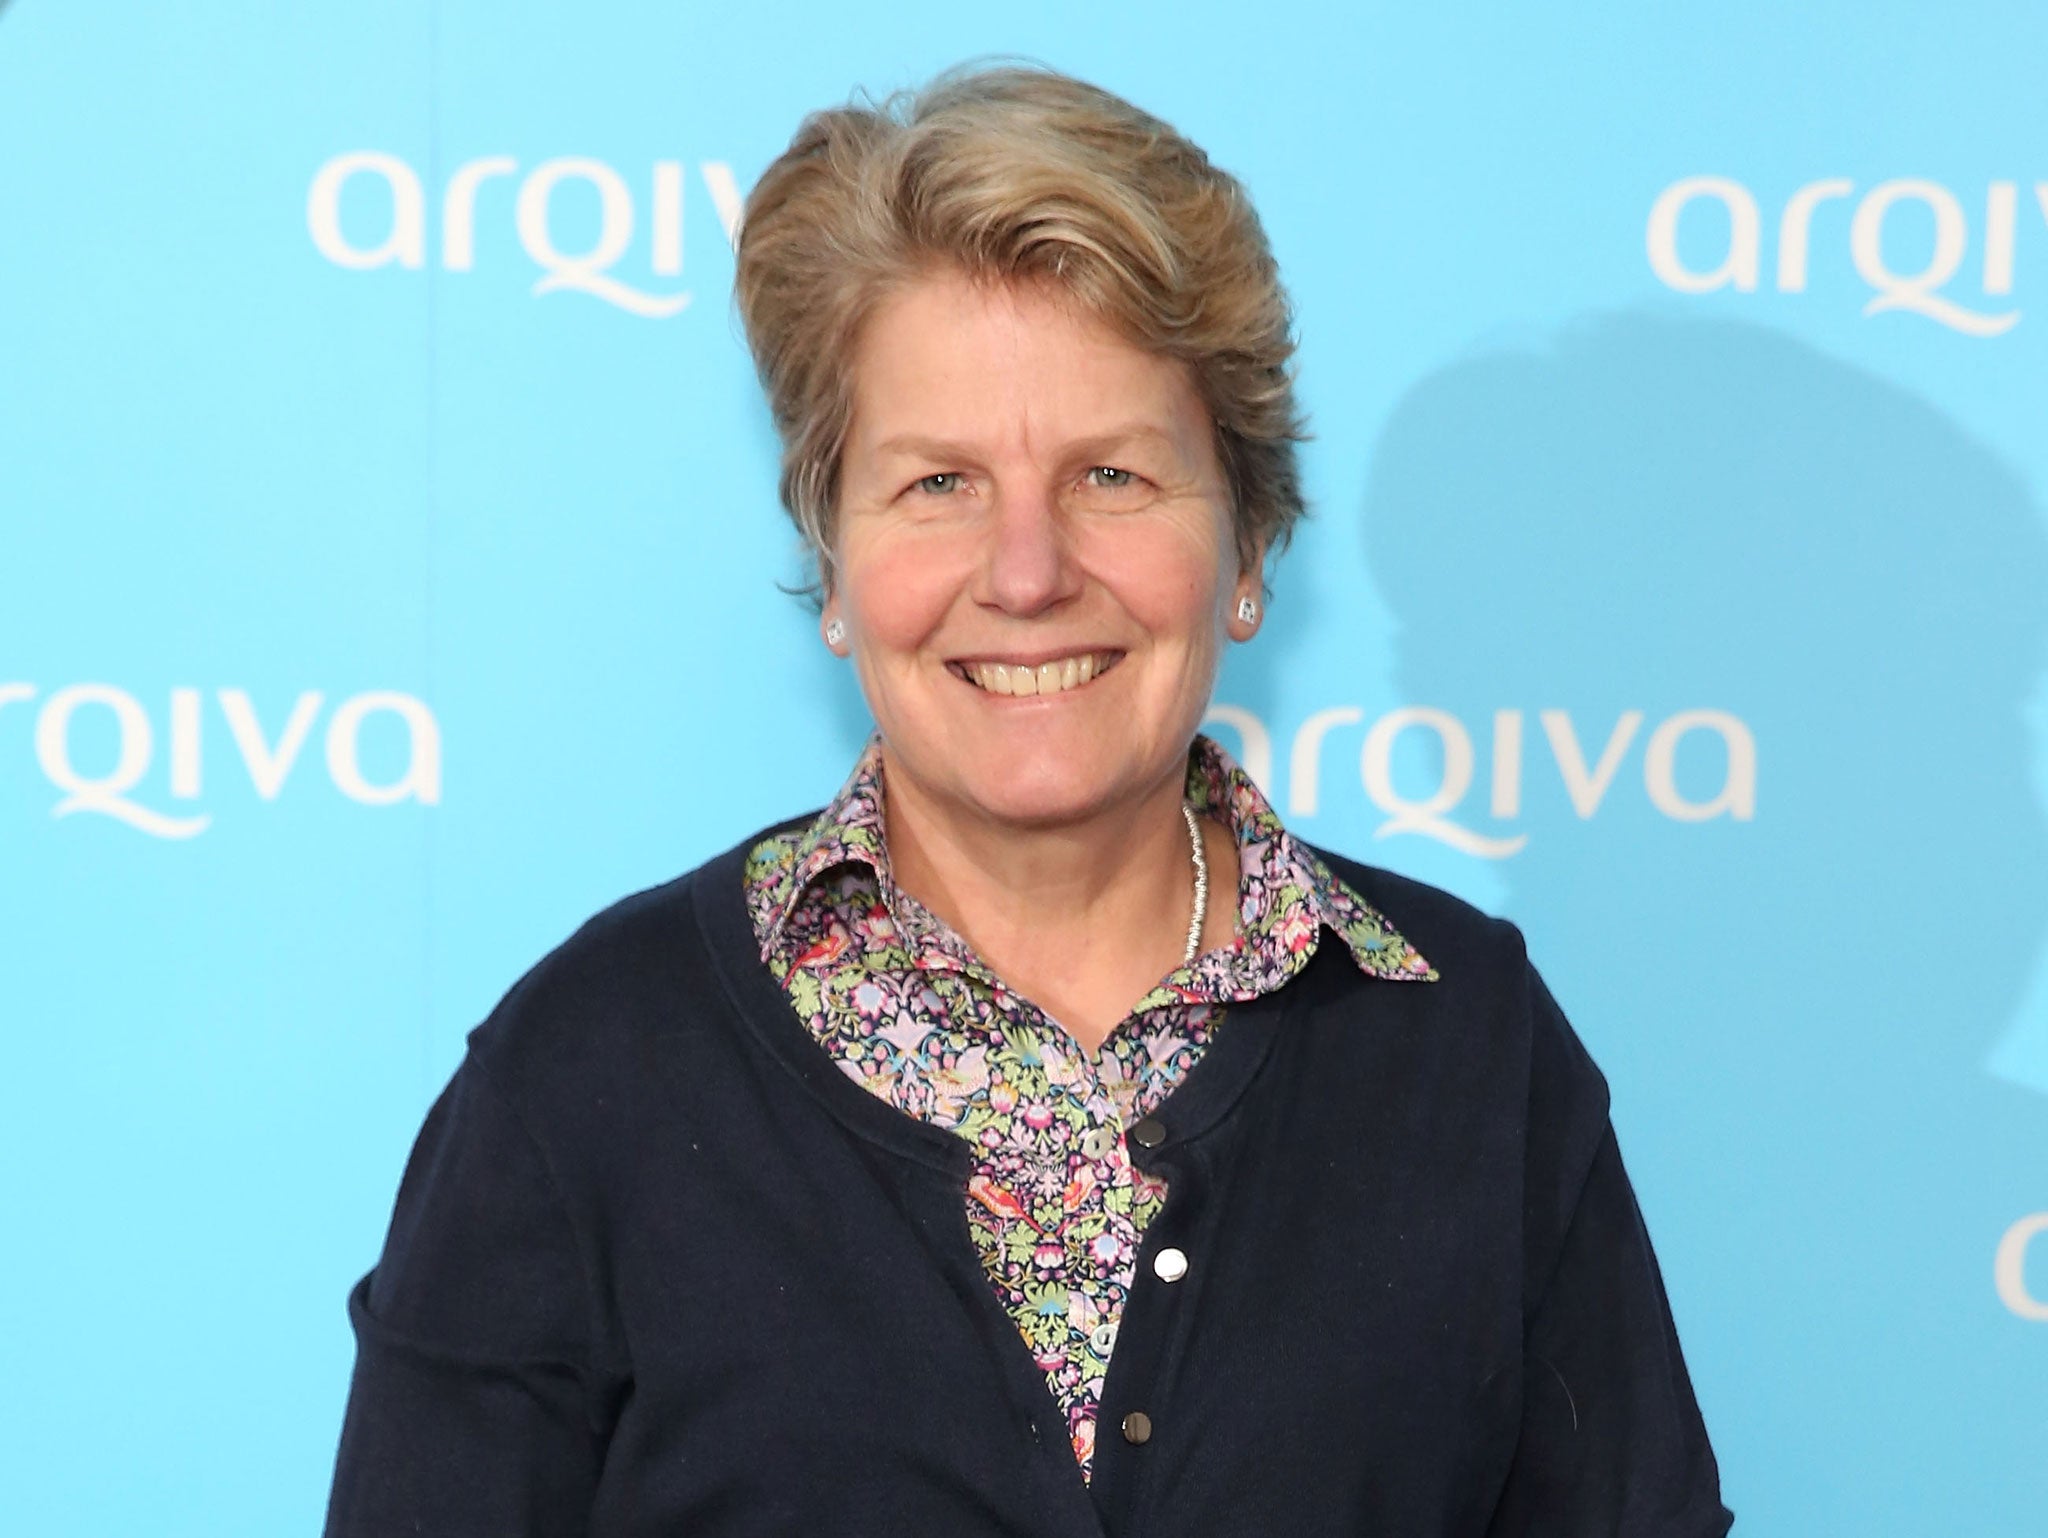 Sandi Toksvig describes her new party as “a fantastic group of women – and indeed men – who have decided that enough is enough and we need to make some changes.”